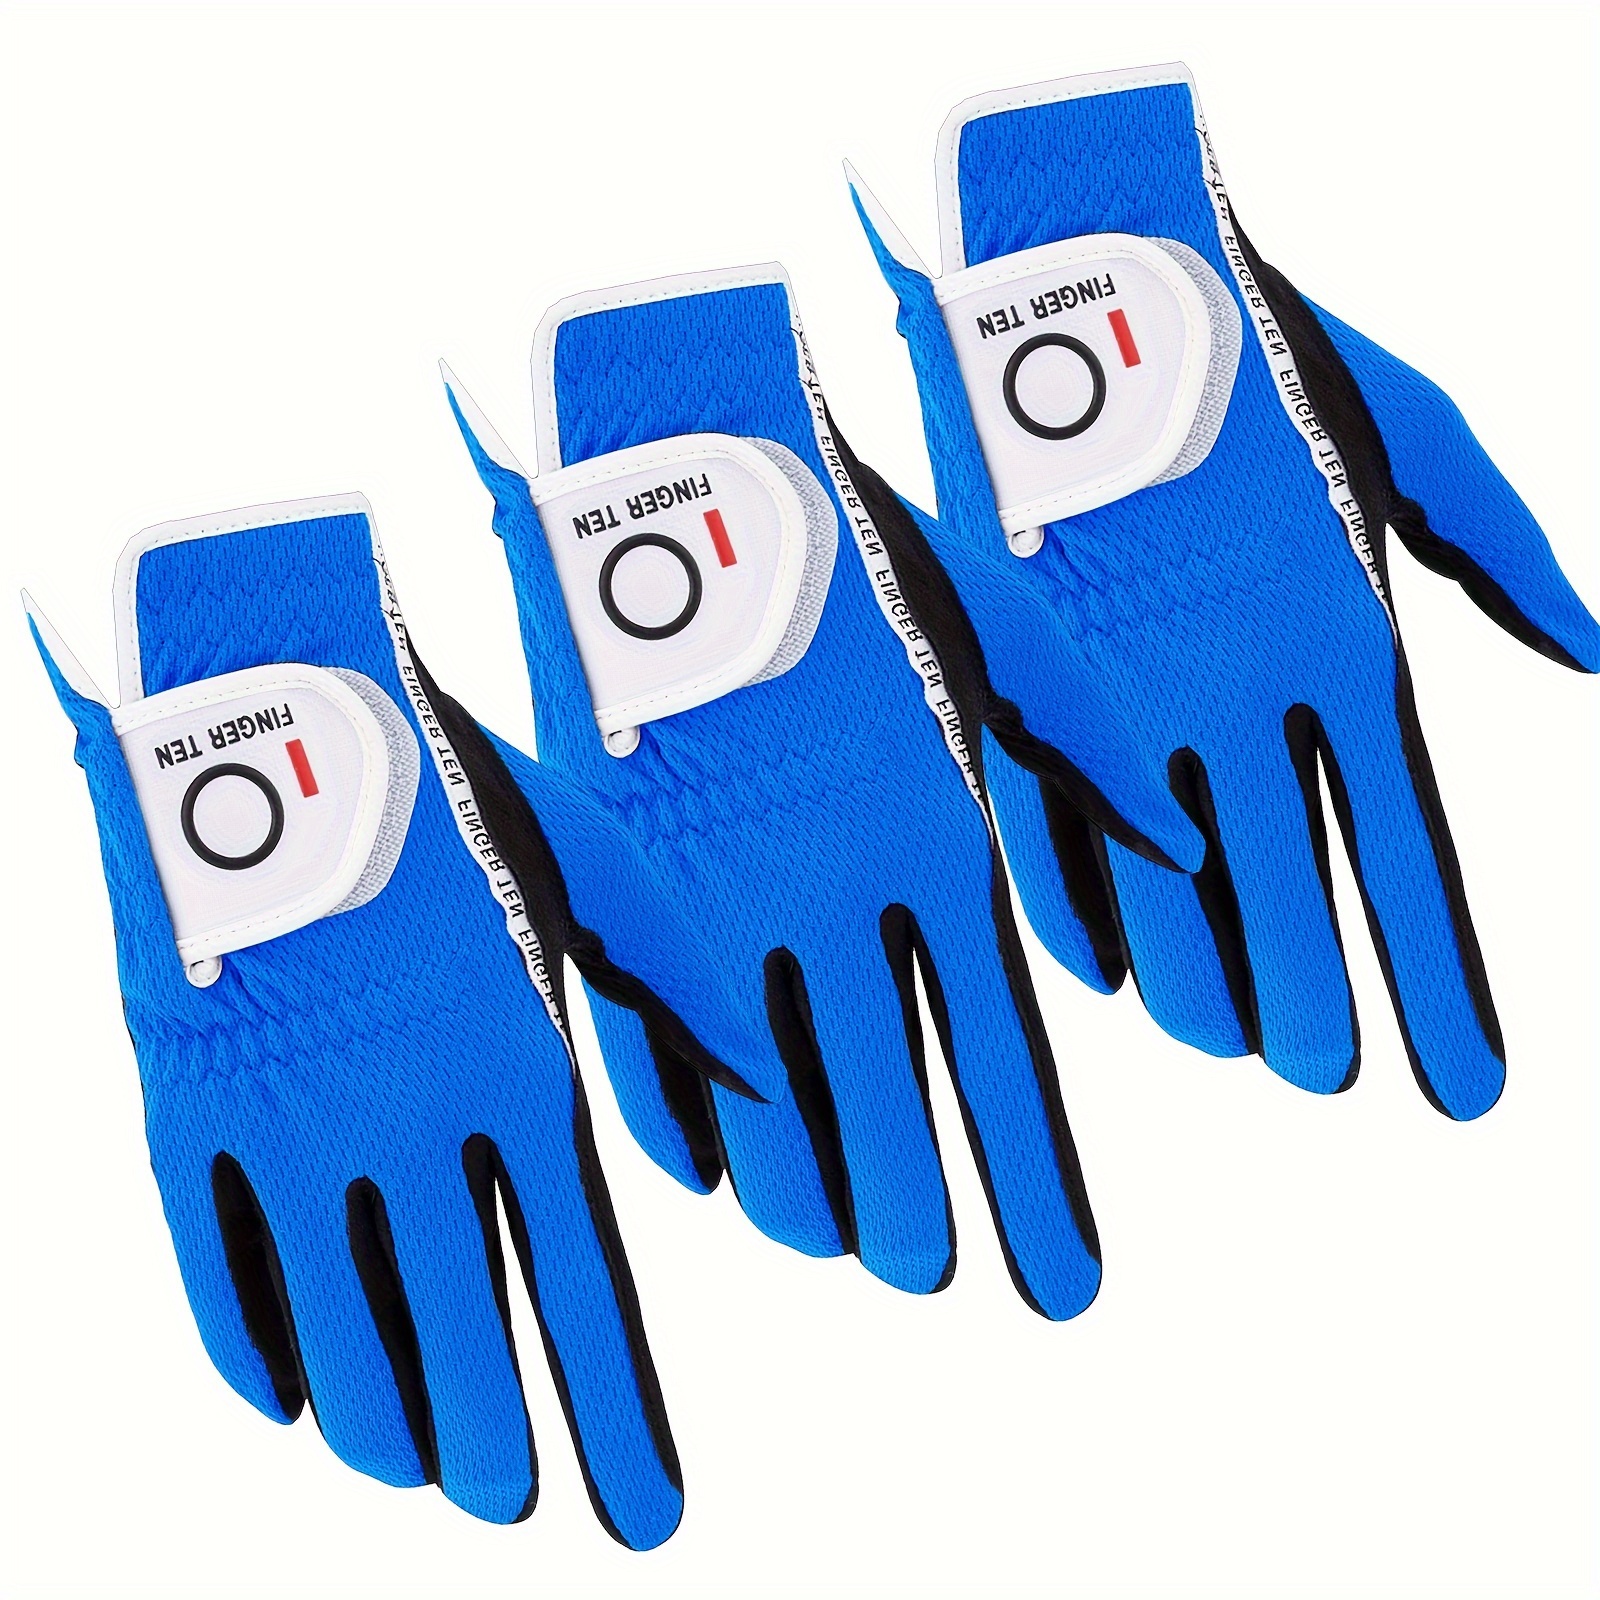 3 pack men's golf gloves for right left handed golfer, all weather performance, s/m/l/xl/xxl blue worn on left hand s 0